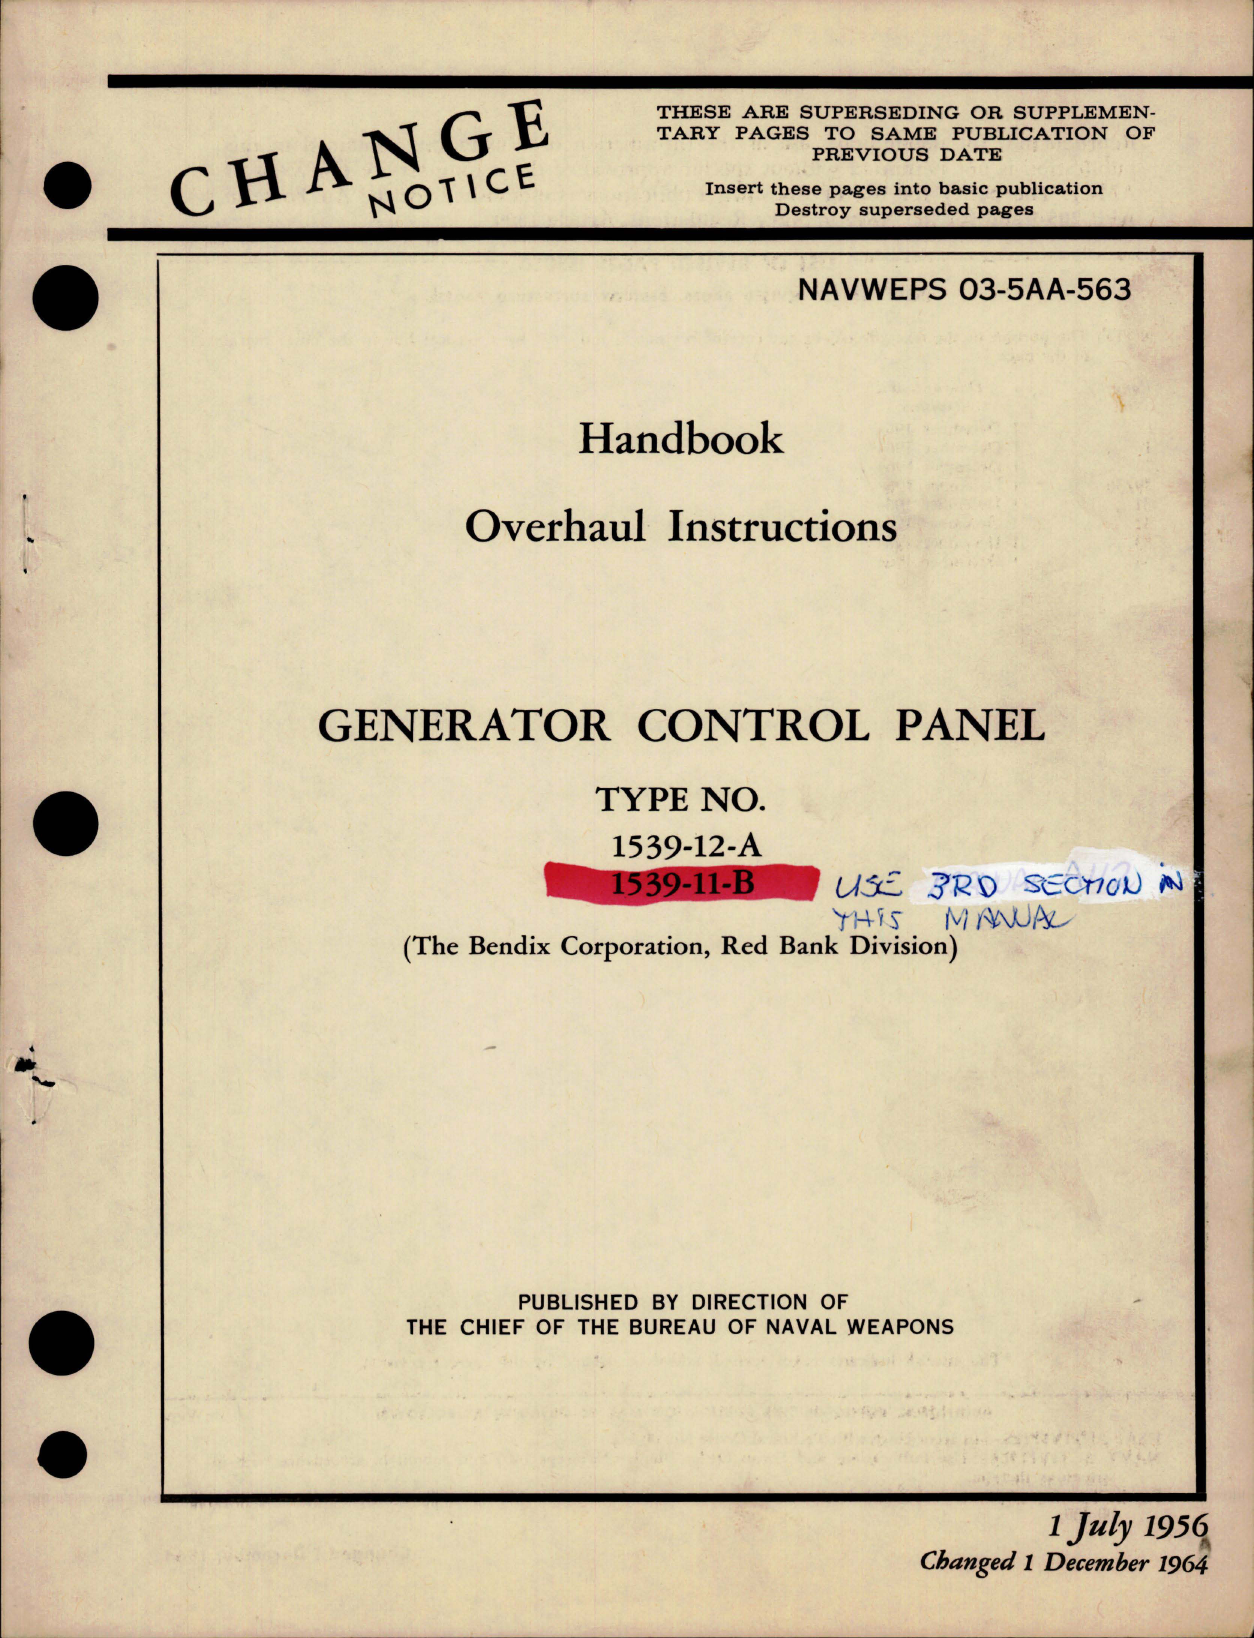 Sample page 1 from AirCorps Library document: Overhaul Instructions for Generator Control Panel - Types 1539-12-A and 1539-11-B 